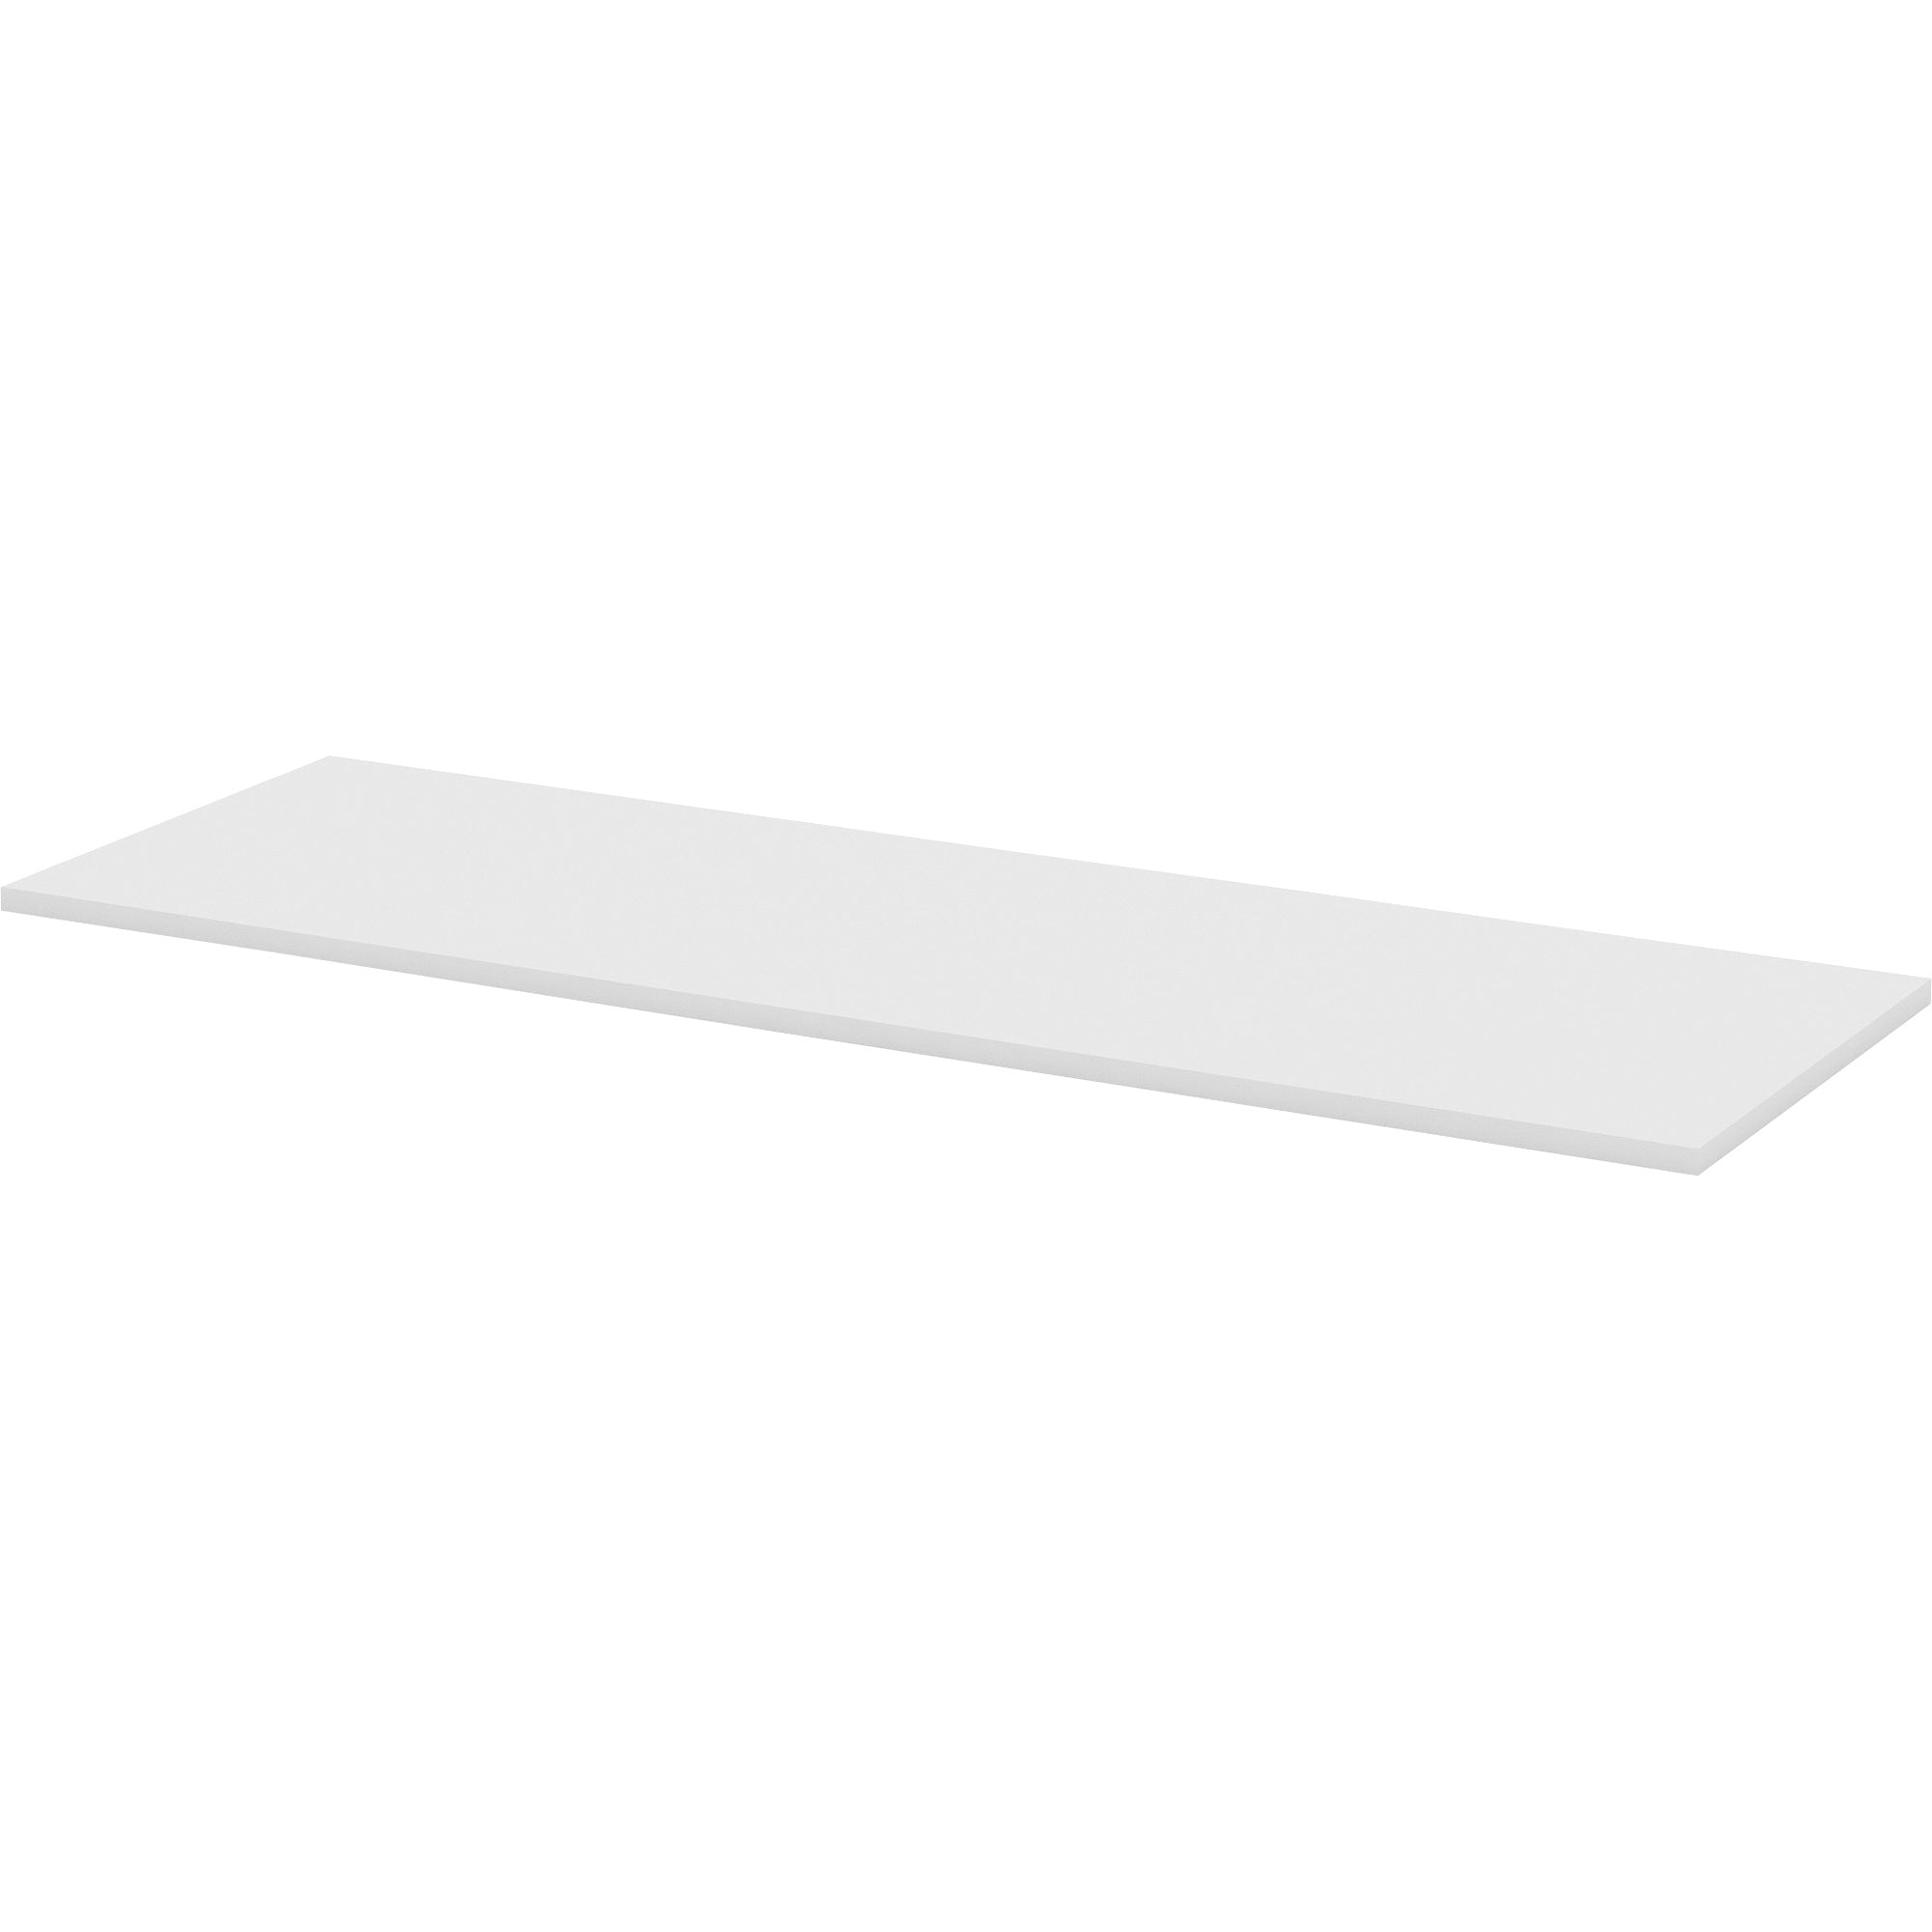 lorell-training-tabletop-for-table-topwhite-rectangle-top-72-table-top-length-x-24-table-top-width-x-1-table-top-thickness-assembly-required-1-each_llr62597 - 1